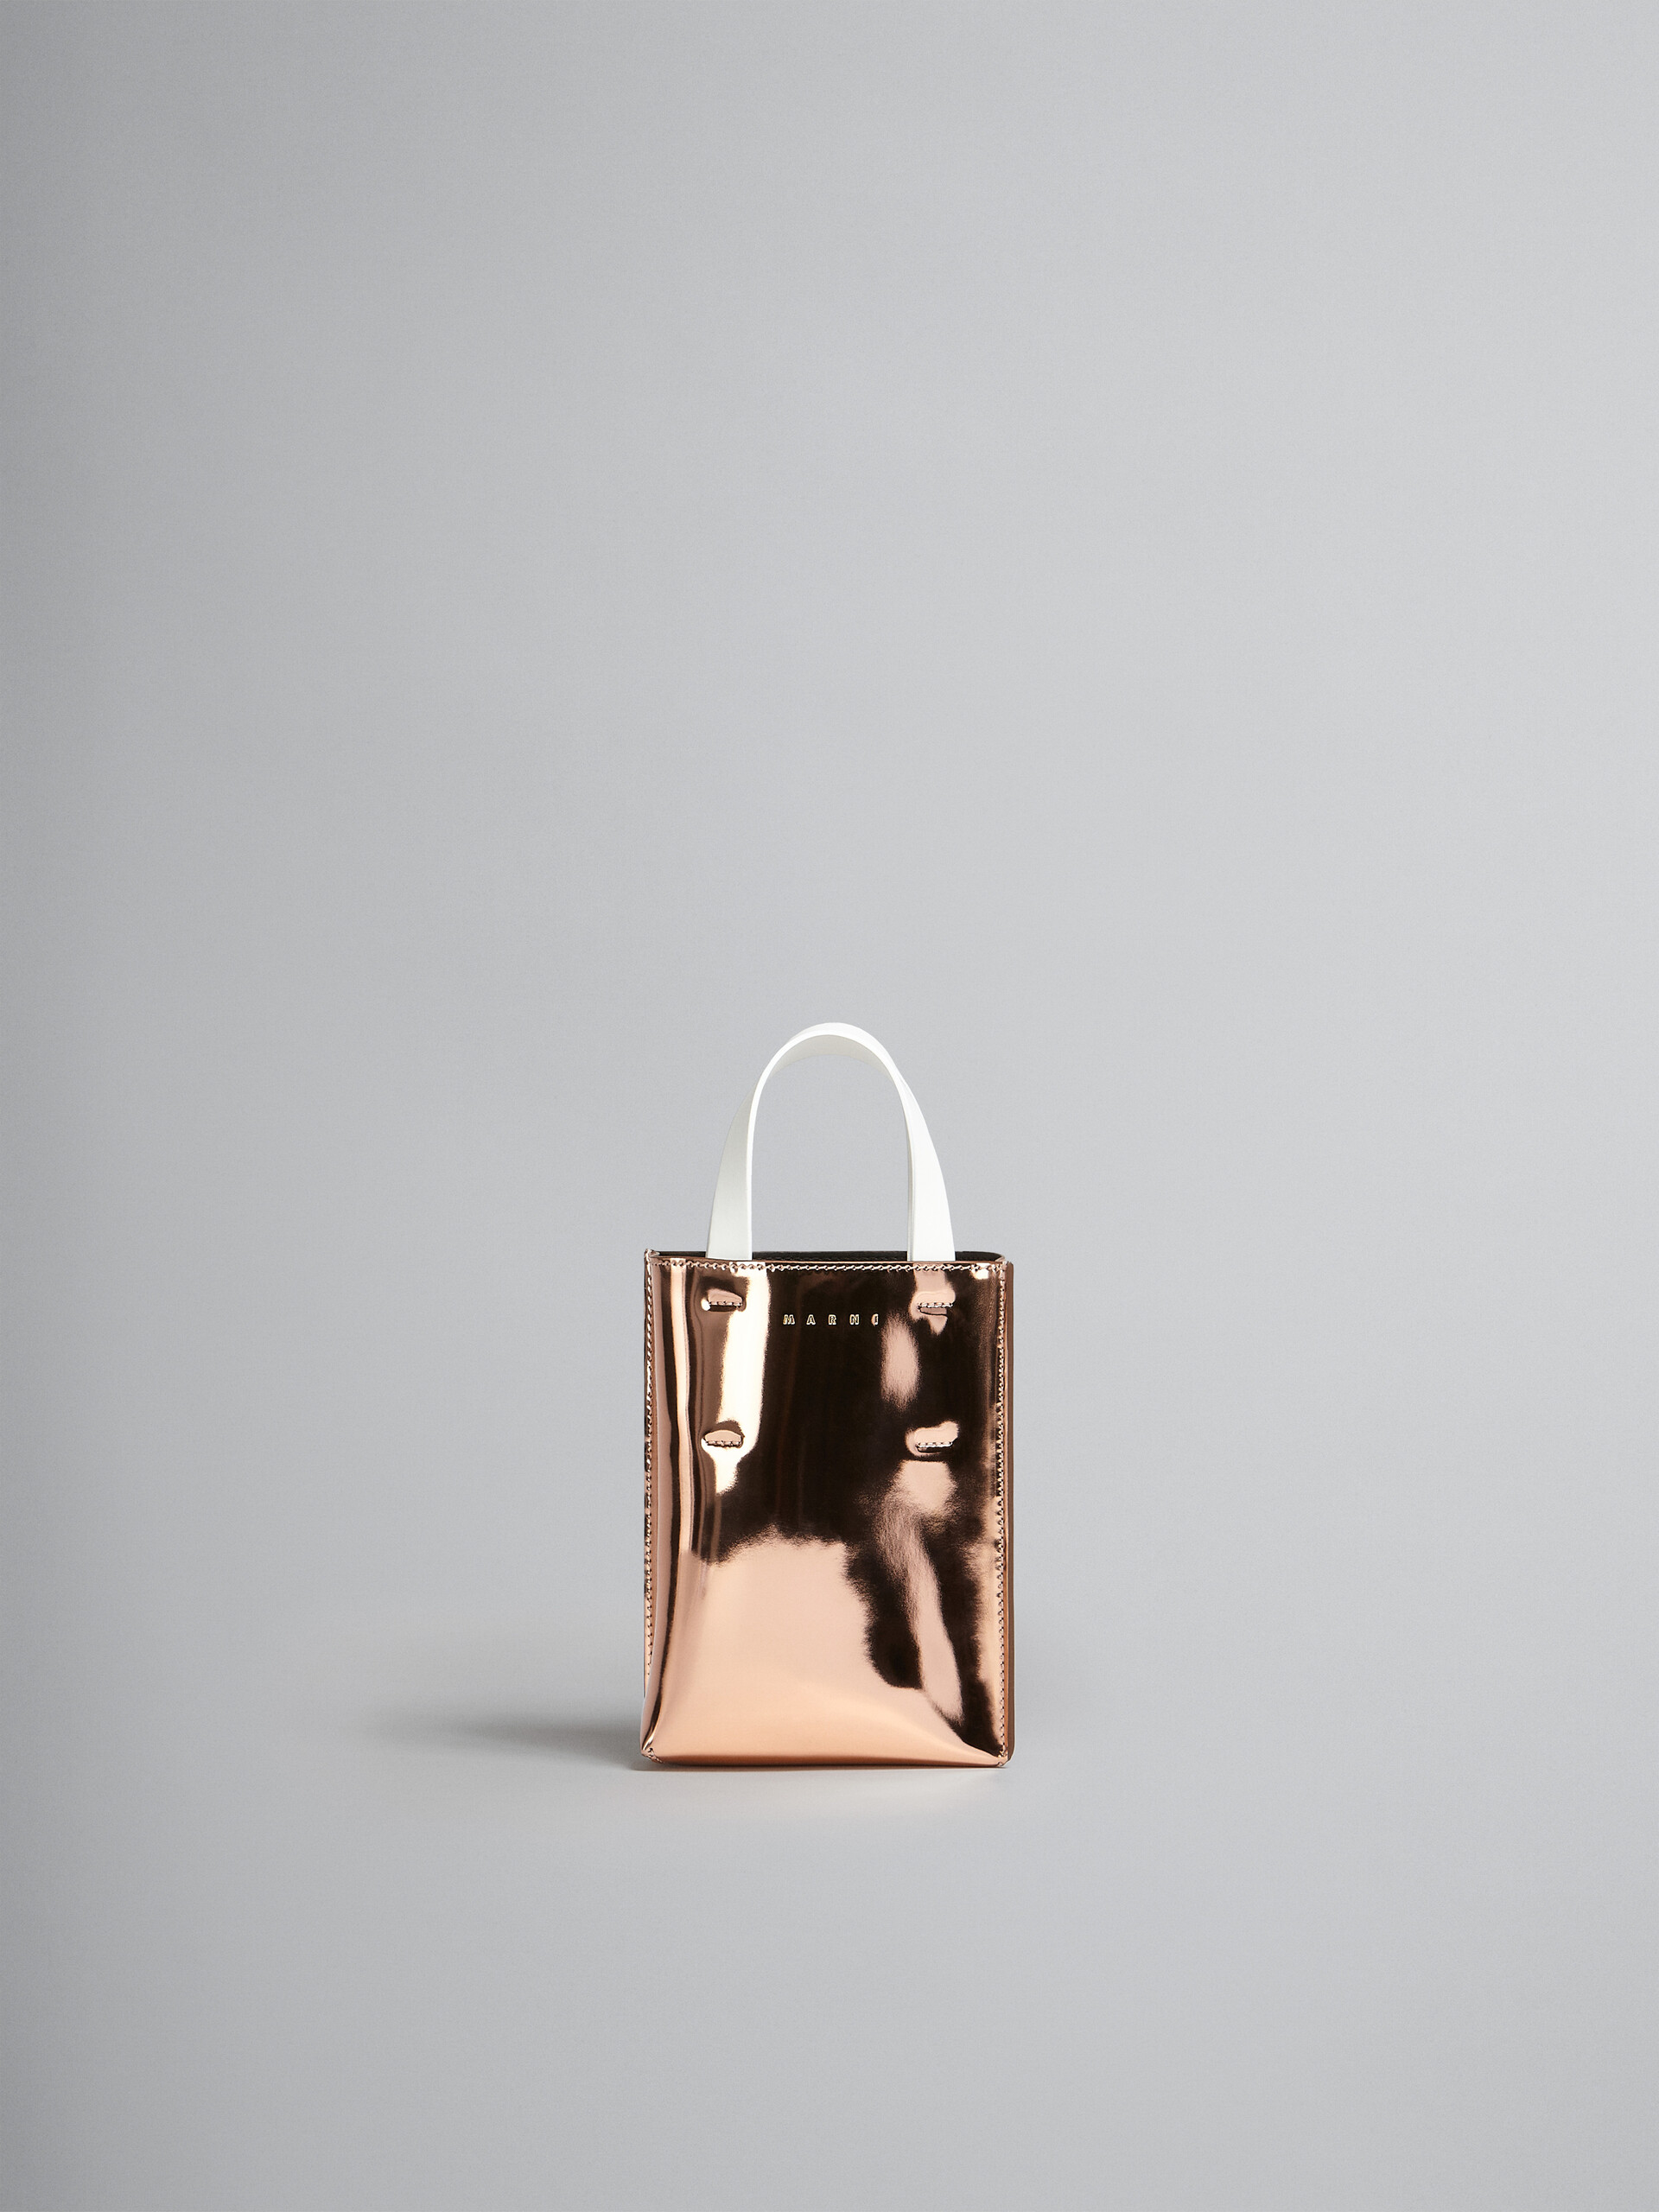 Museo Nano Bag in rose gold mirrored leather - Shopping Bags - Image 1